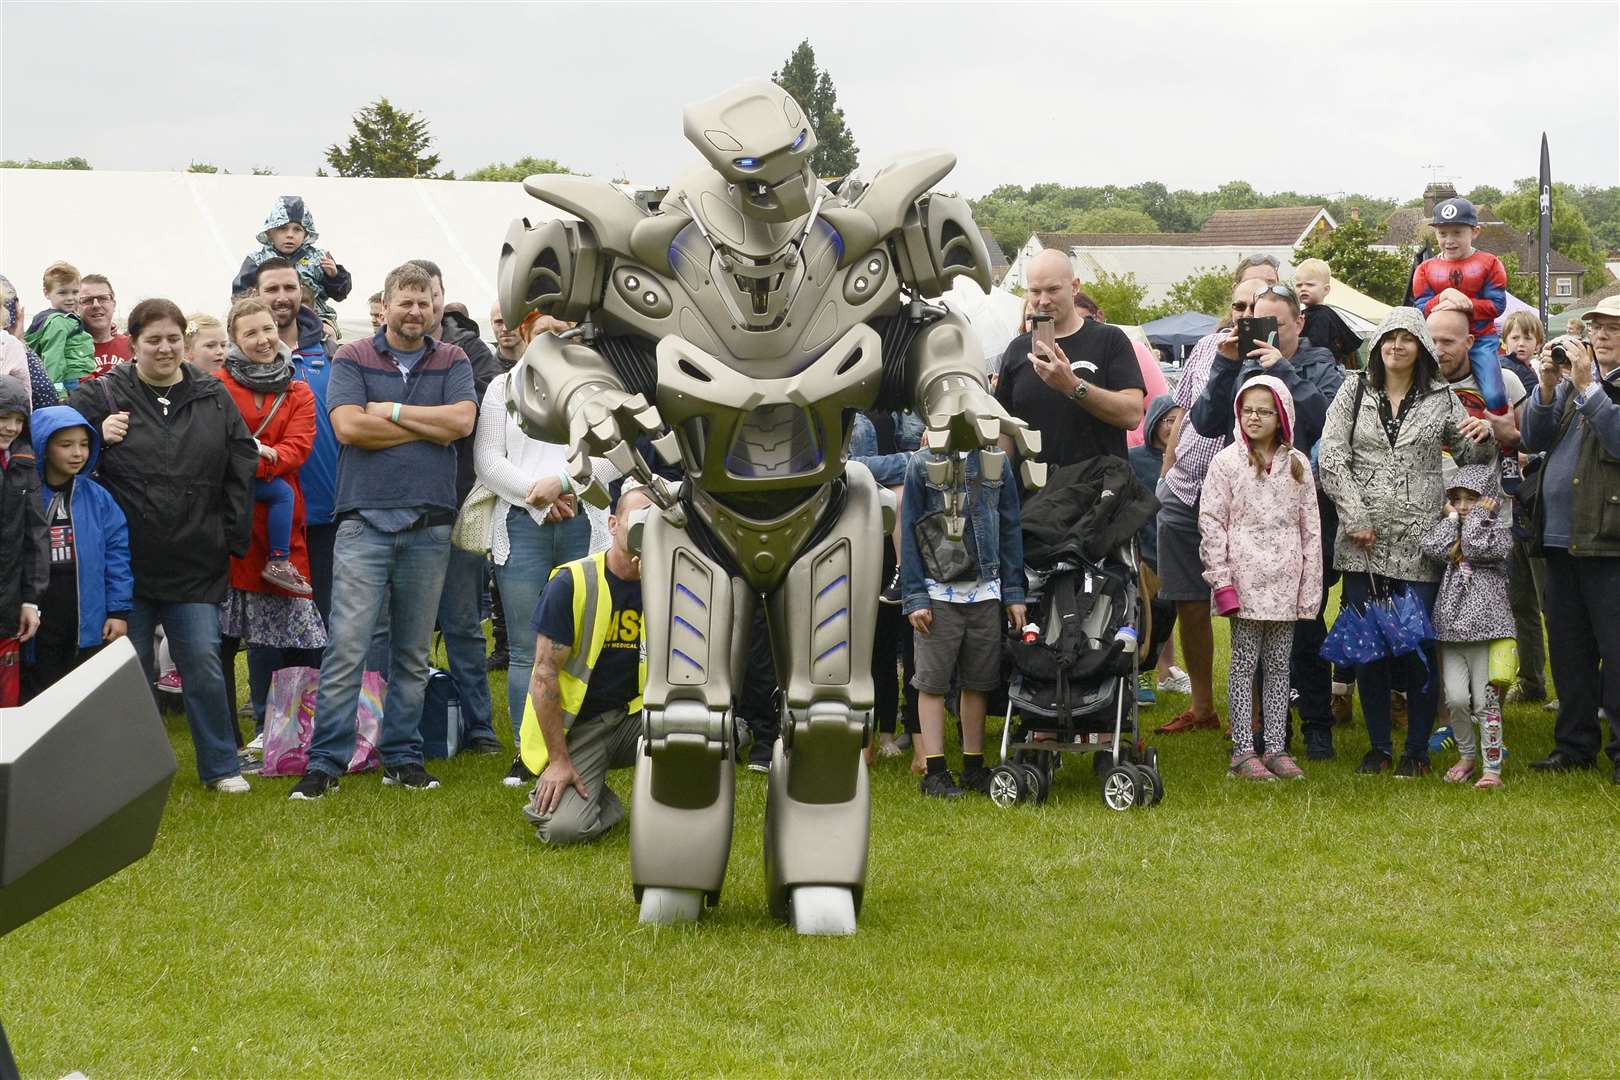 Titan the robot entertains crowds at Sci-Fi by the Sea at Herne Bay Junior School. Picture: Paul Amos